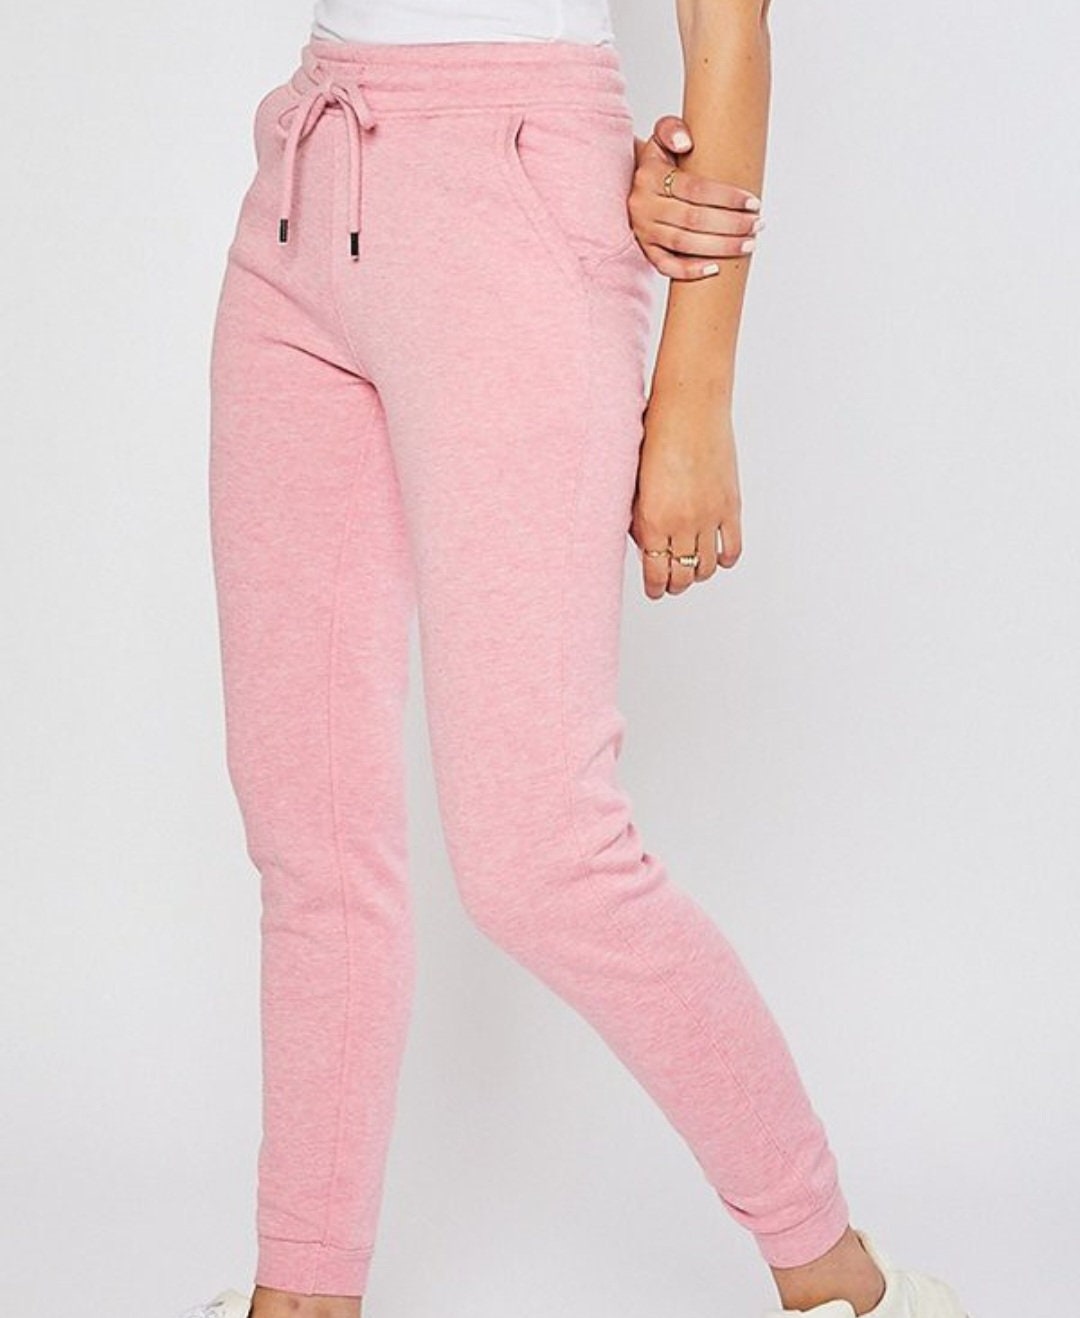 Women's Tapered Jogger Sweatpants, High Waisted Athletic Jogging